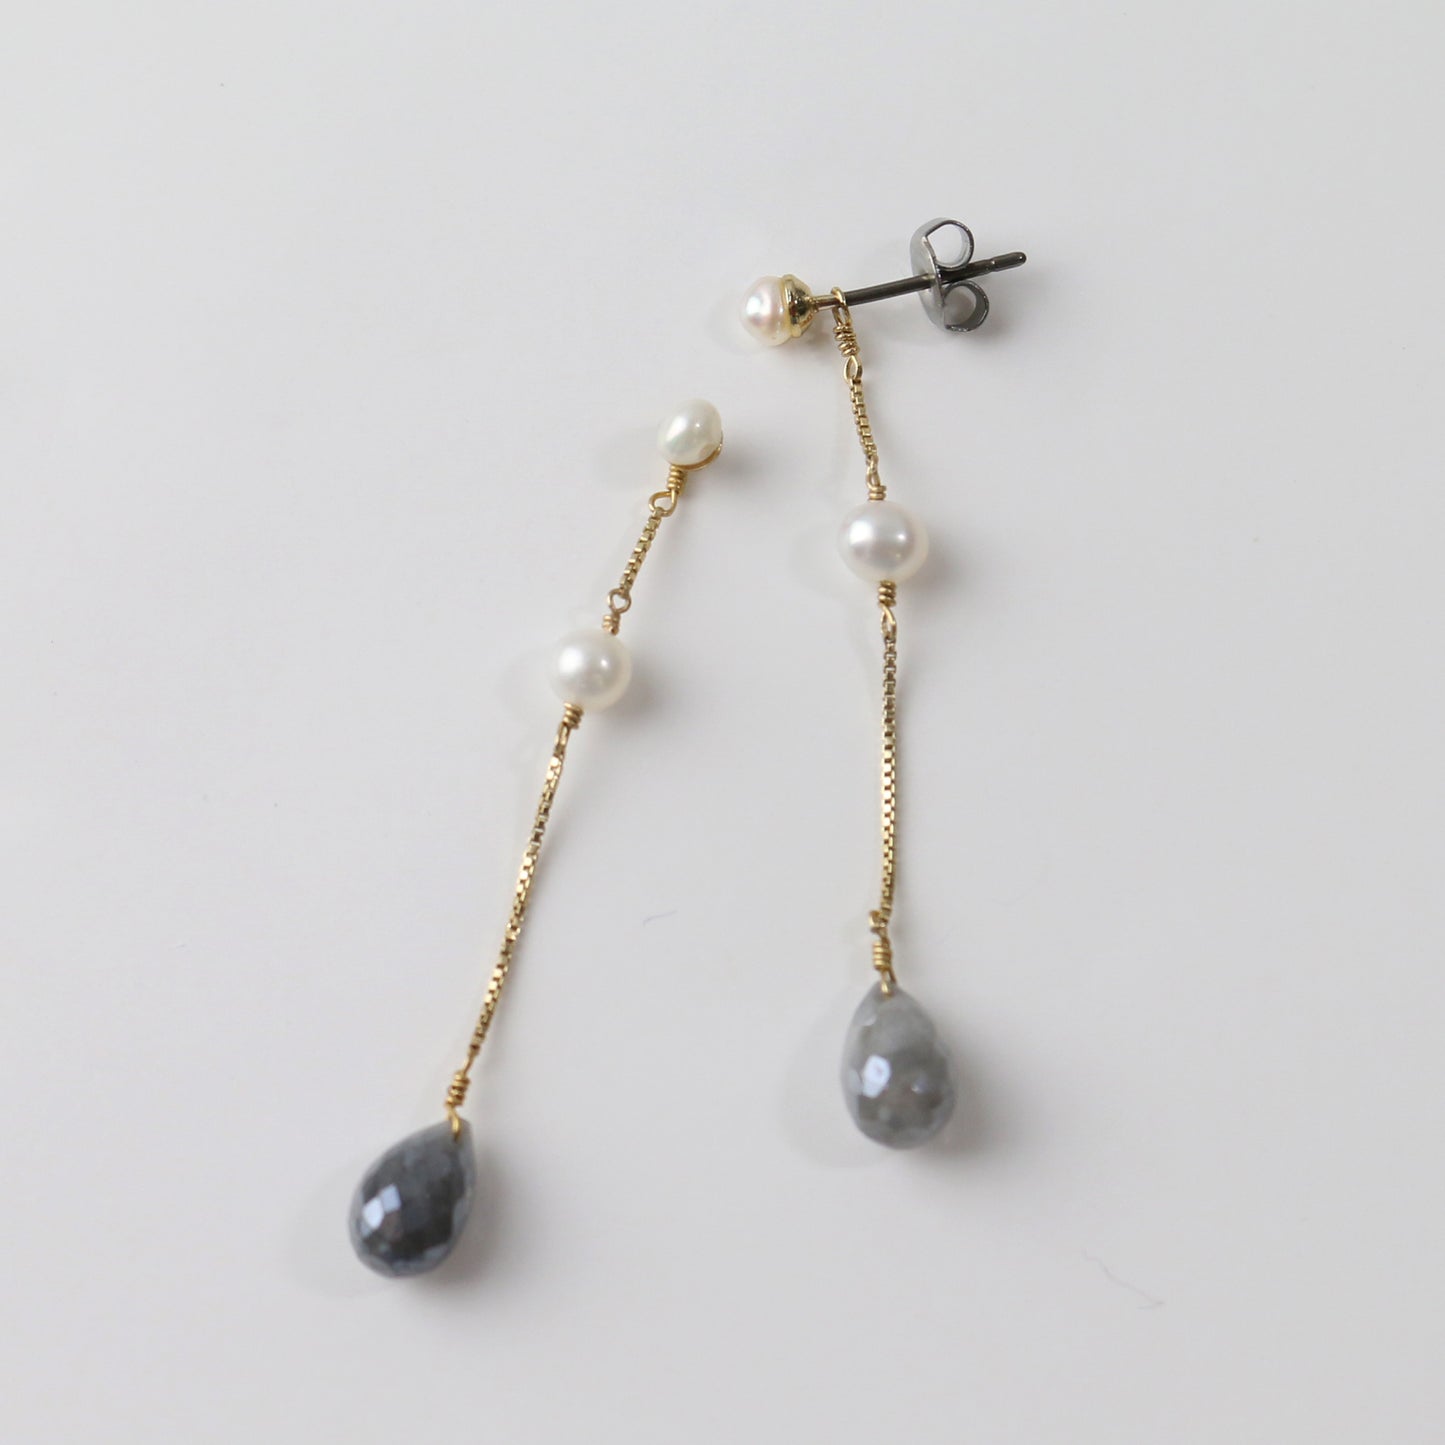 Freshwater pearls and graceilver night earrings